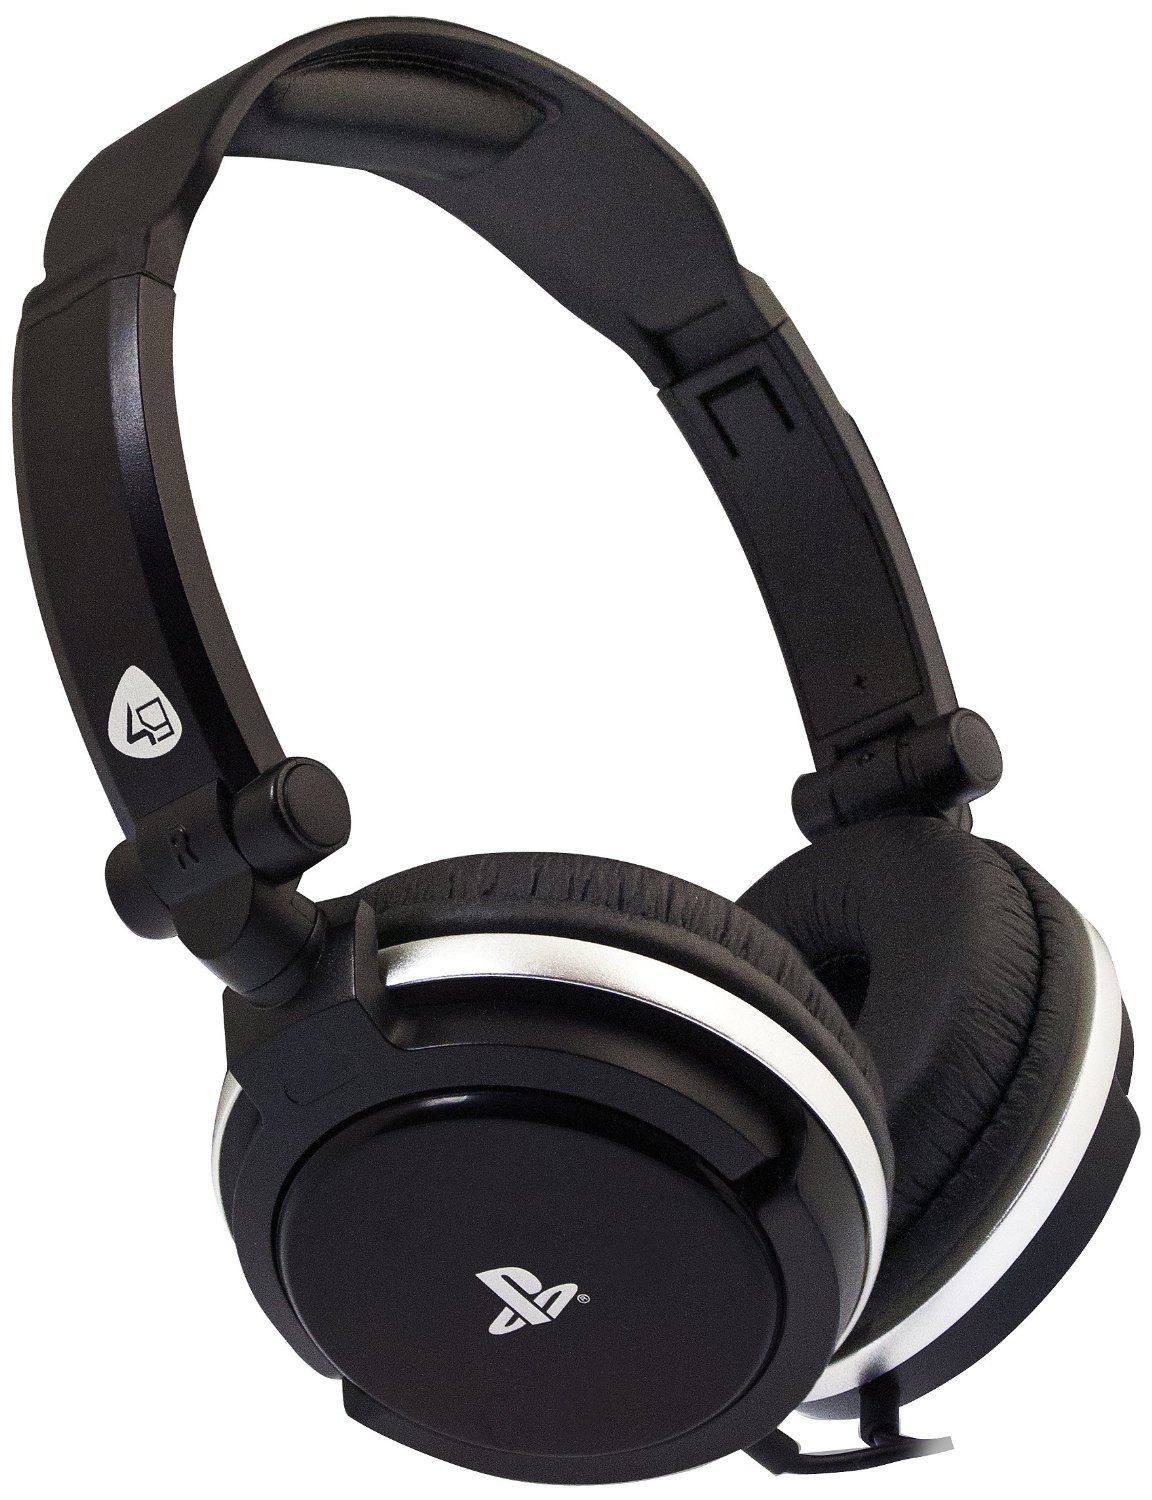 Playstation 4 Officially Licensed Stereo Gaming Headset